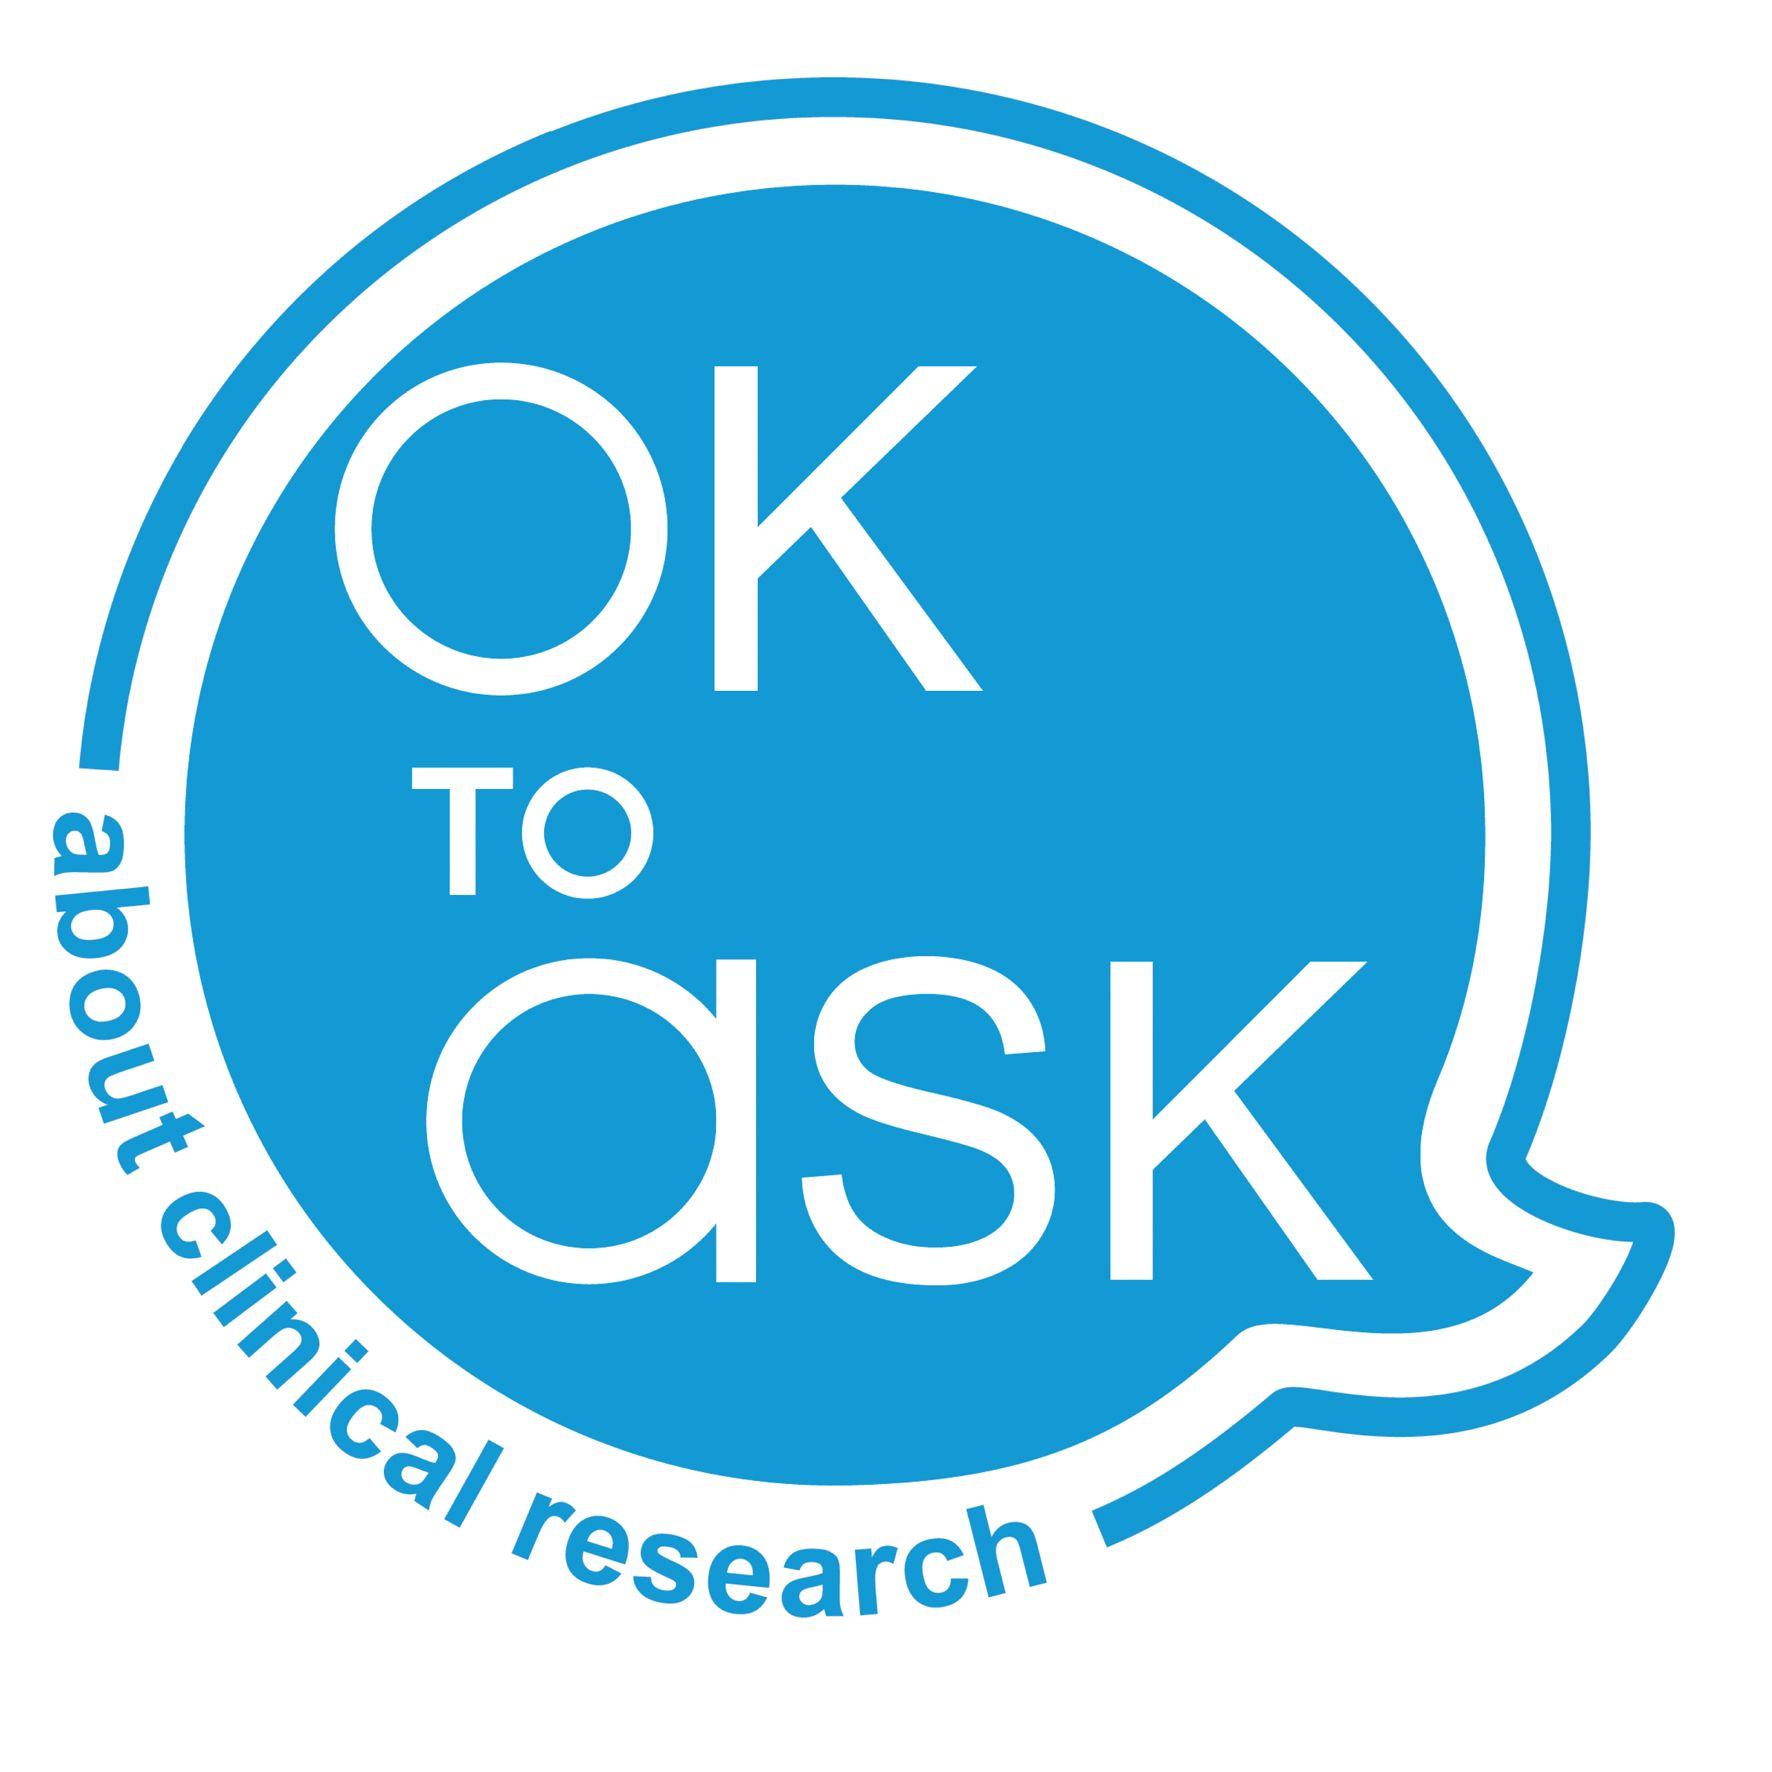 Ask Logo - ok to ask logo - South Tees Hospitals NHS Foundation Trust | South ...